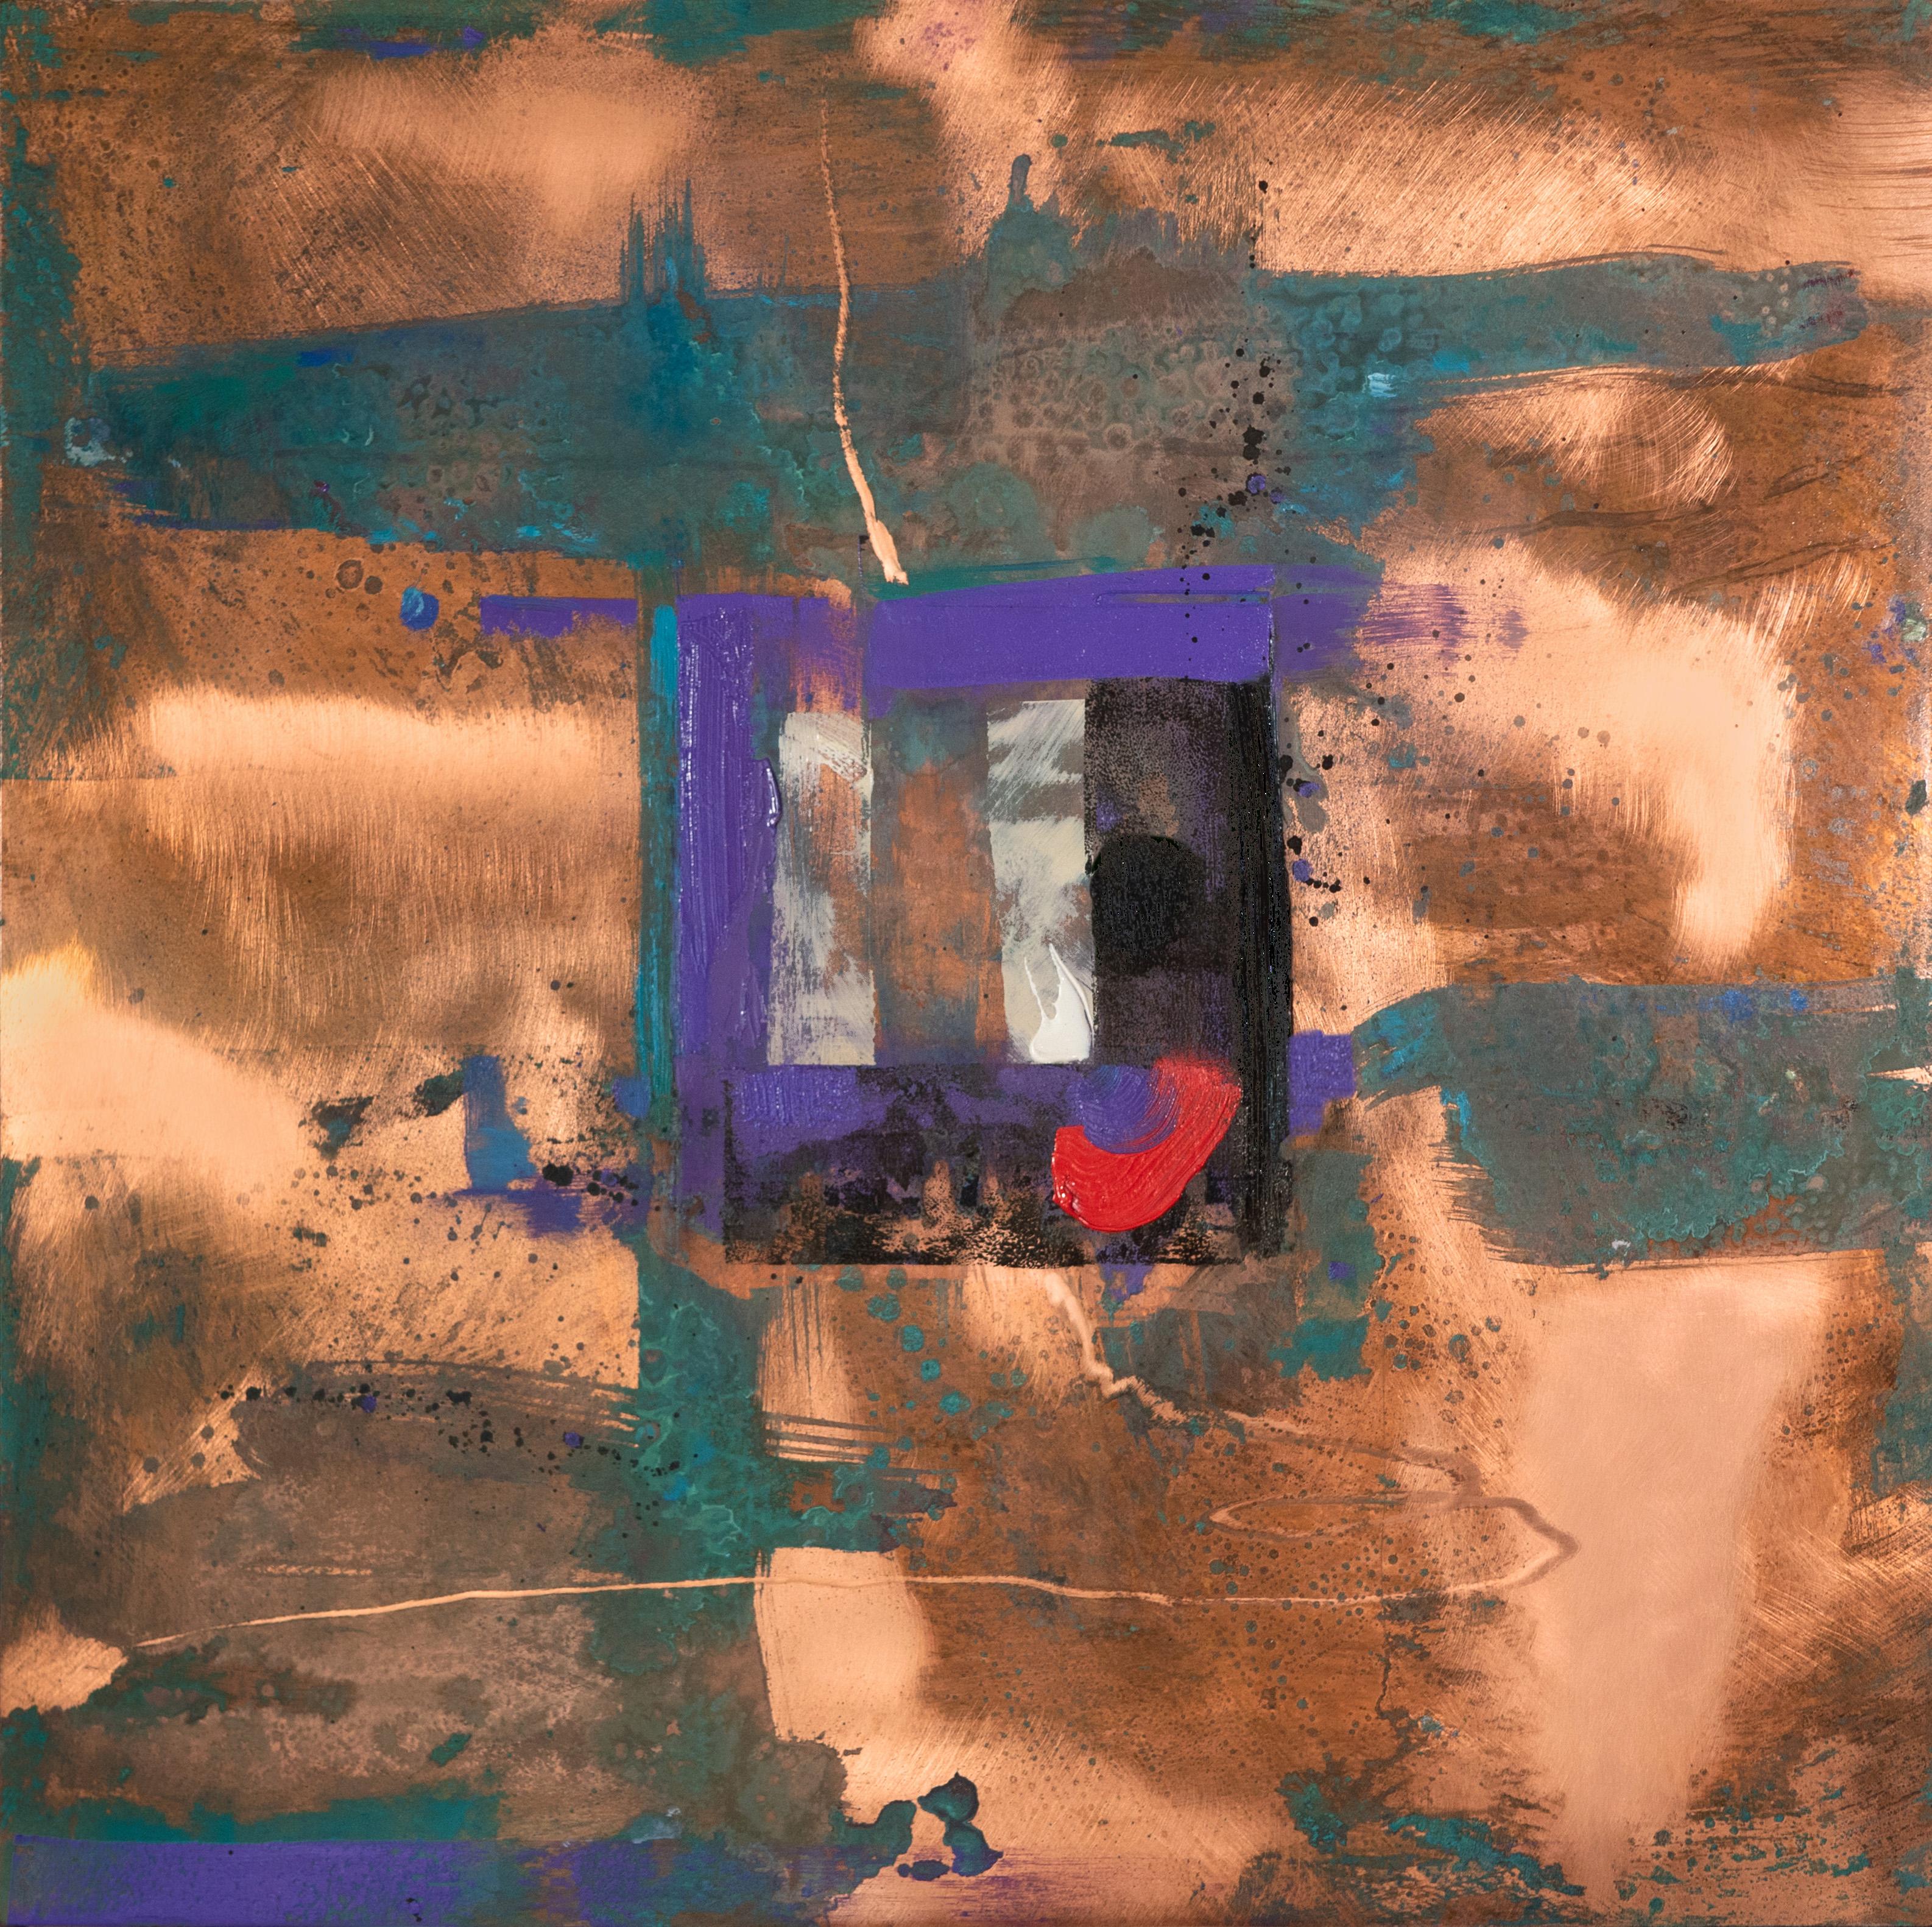 Richard Hawk Abstract Painting - “Wanderlust” Oil painting on Copper - Abstract blue red black oxidized patina